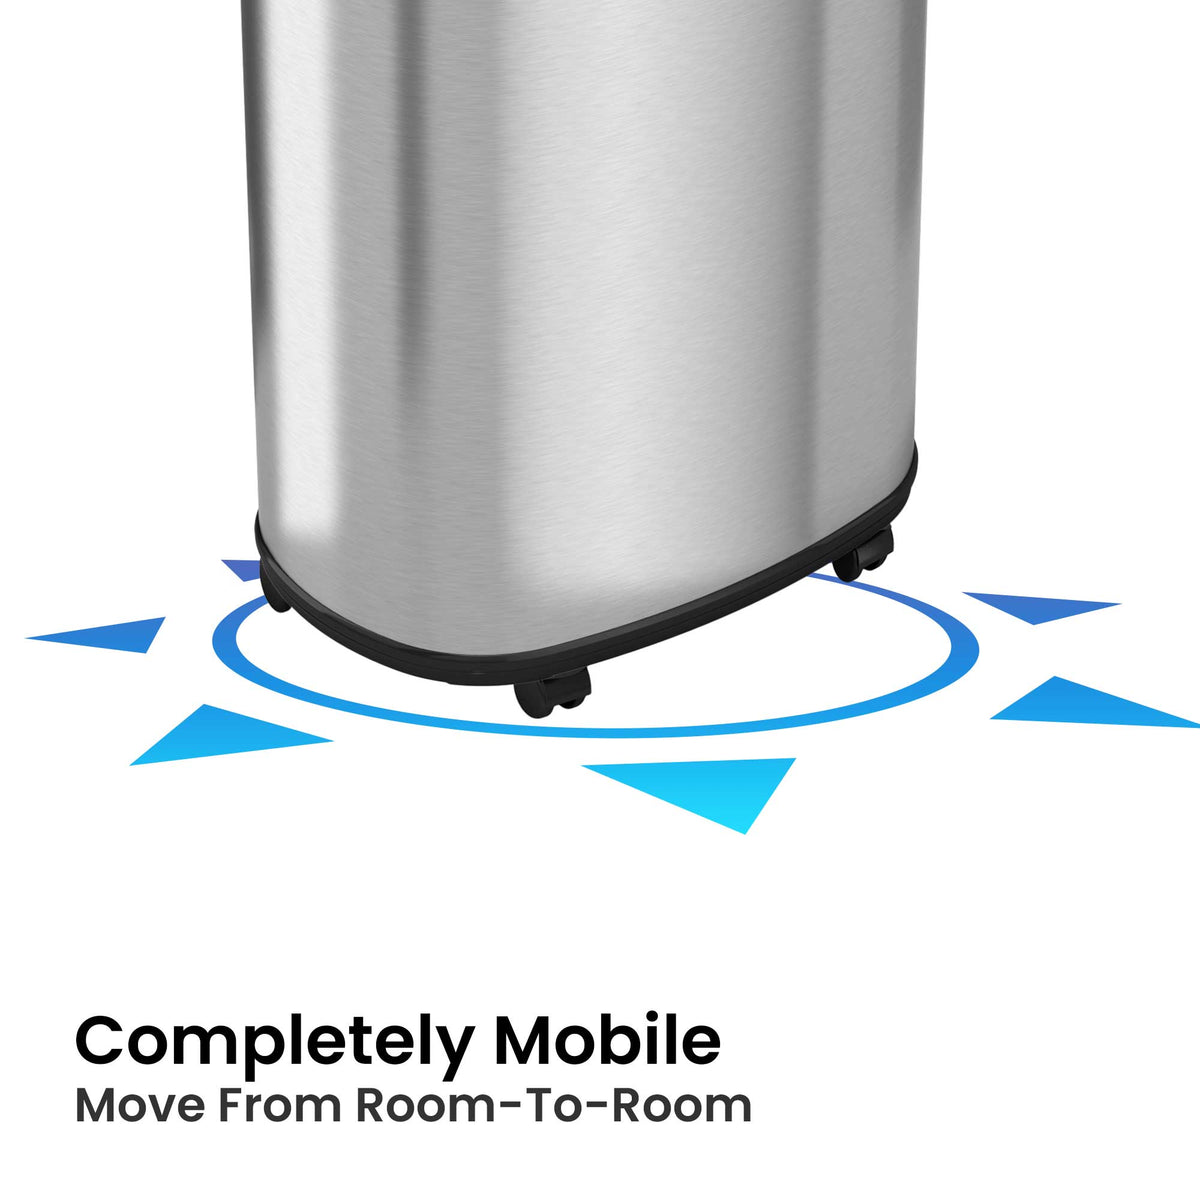 16 Gallon / 60 Liter Elliptical Open Top Trash Can with Wheels Completely Mobile